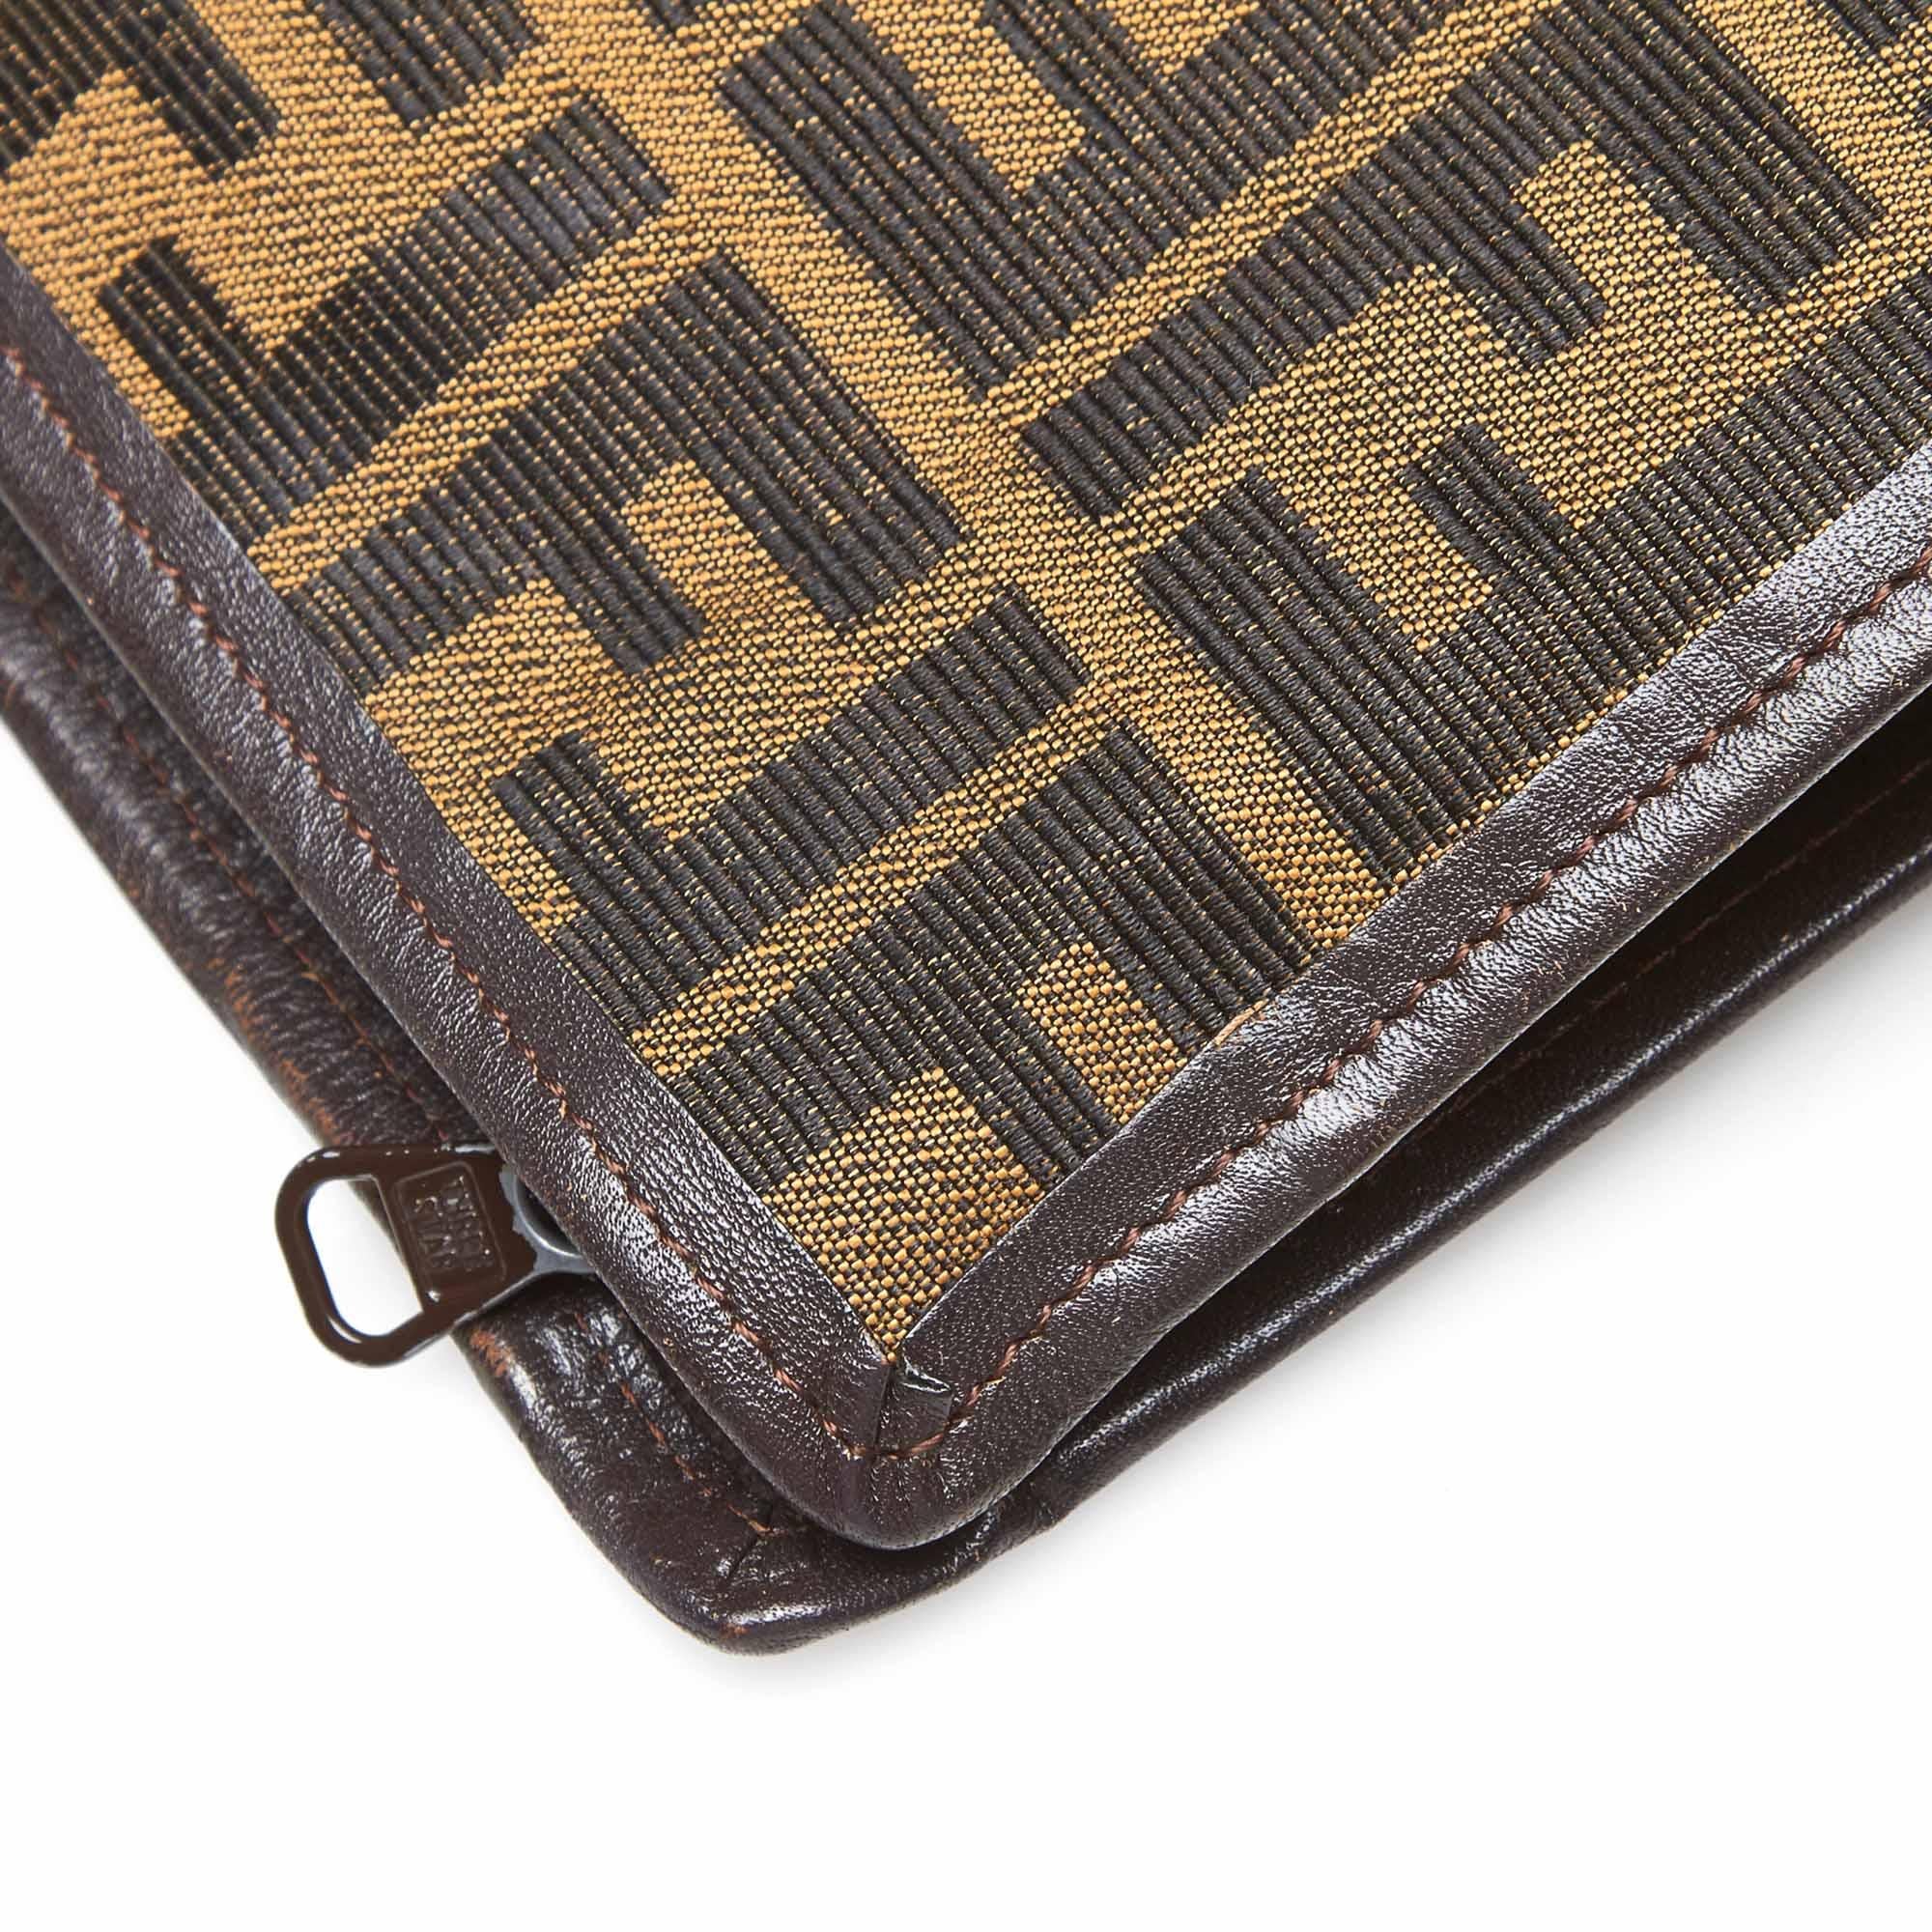 Vintage Authentic Fendi Brown Canvas Fabric Zucca Clutch Bag Italy SMALL  4